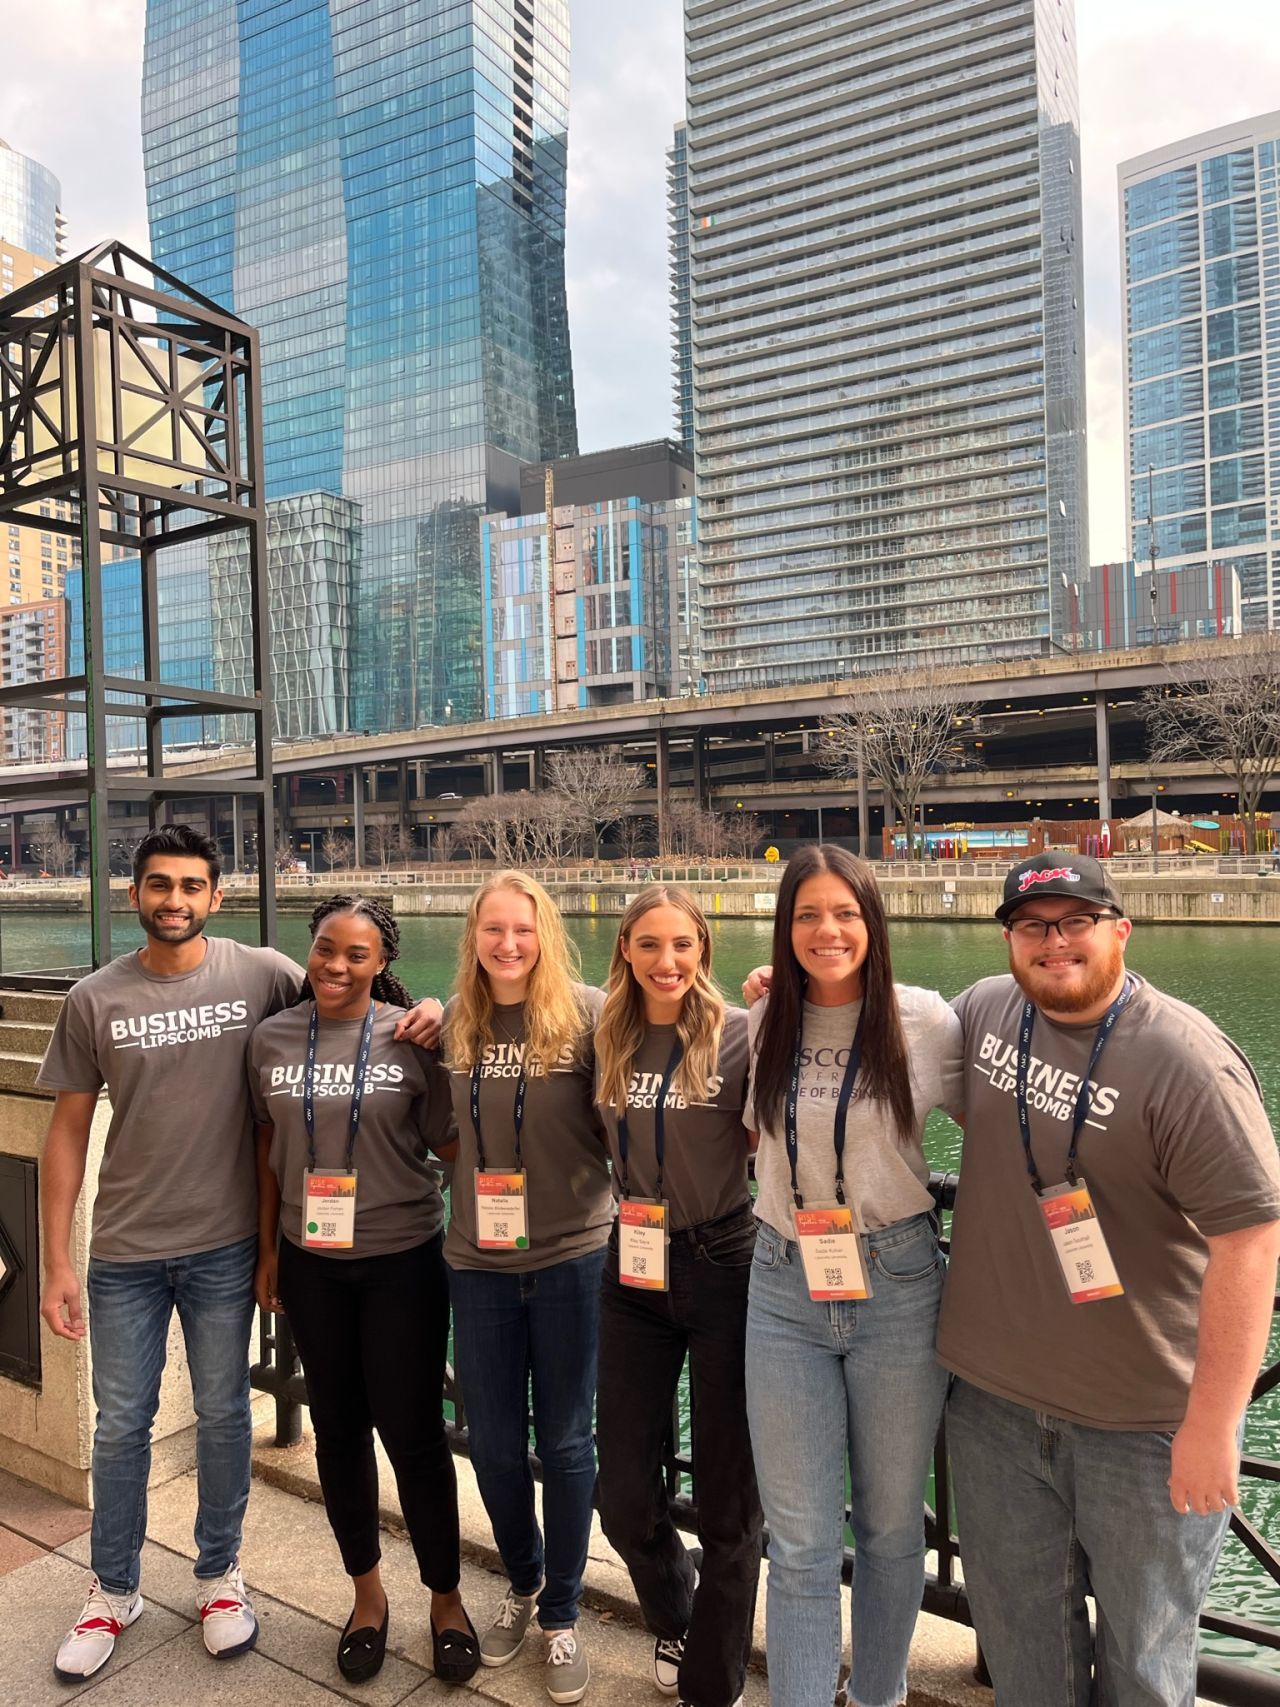 ICC '22 competitors in front of the Chicago River.